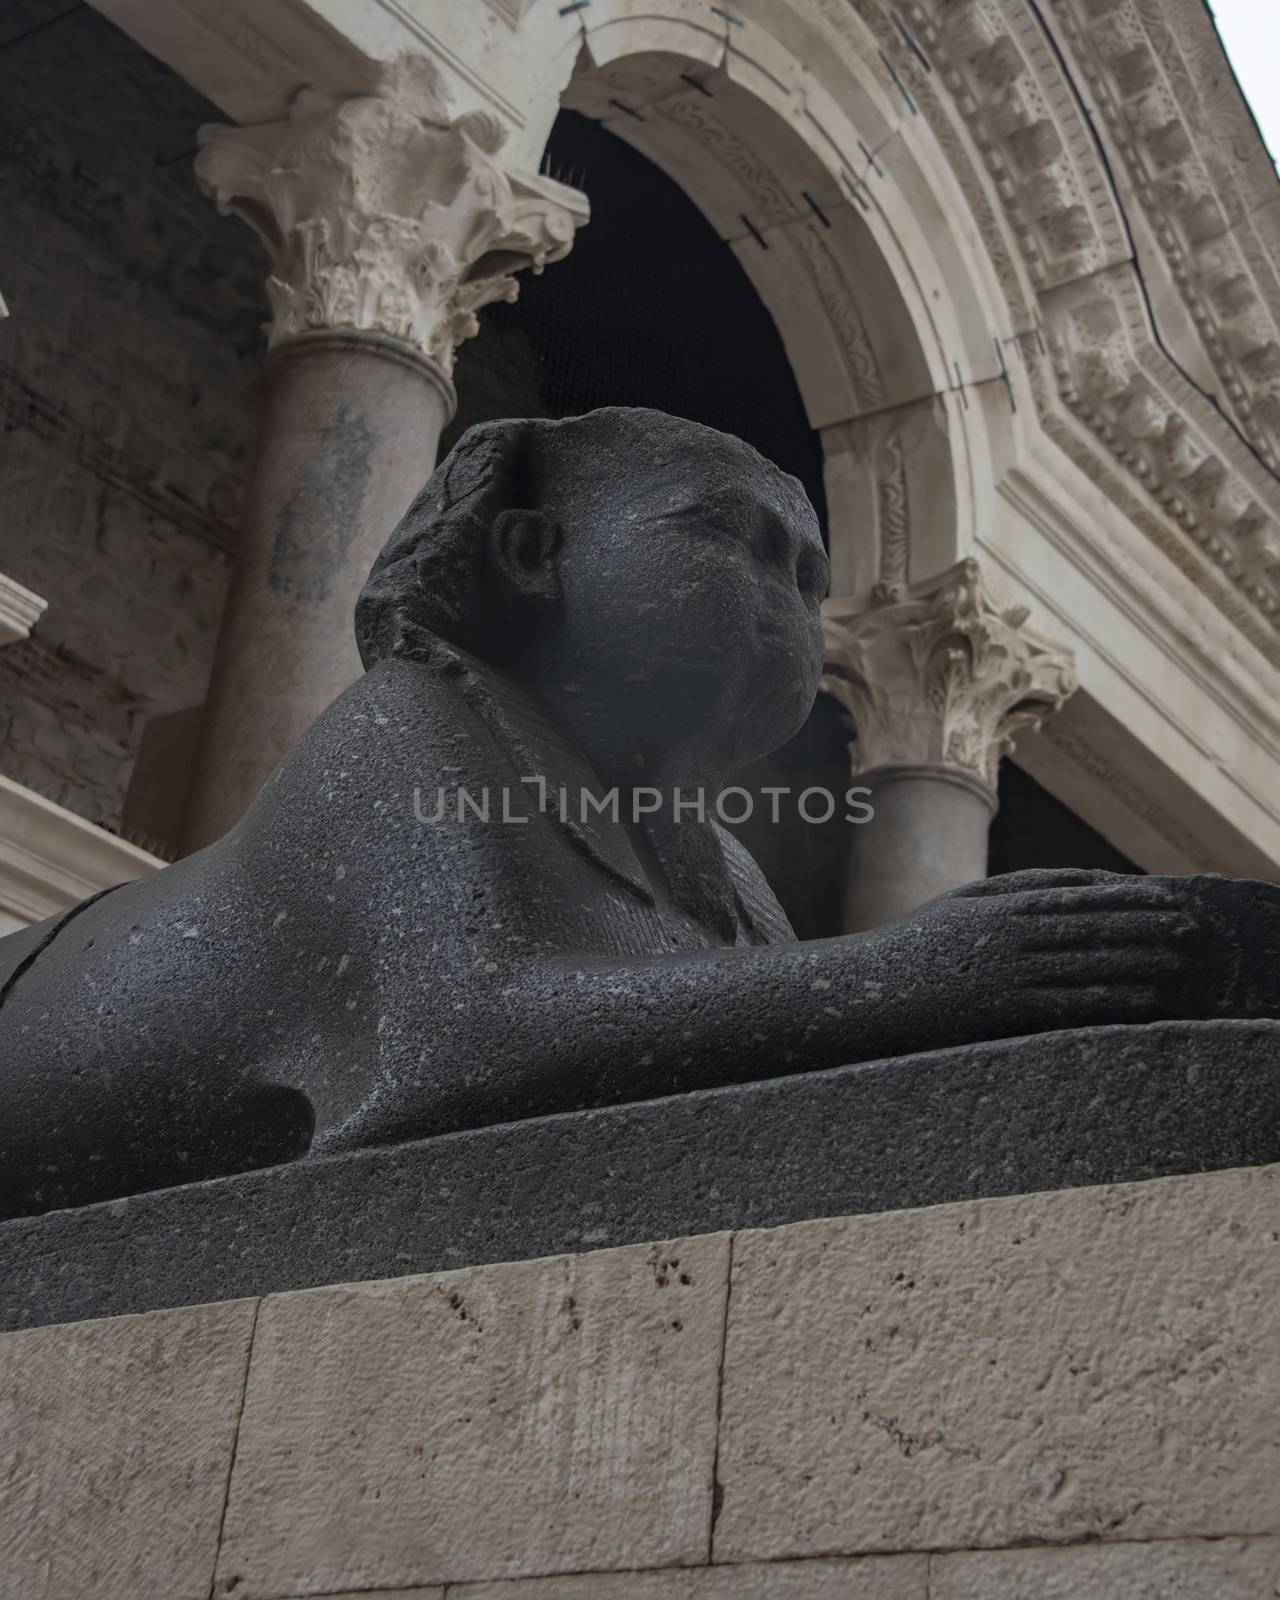 Croatia, Split - June 2018: Ancient Egyptian sphinx in the square of the Diocletian Palace in Split. The Sphinx was damaged during renovation works.